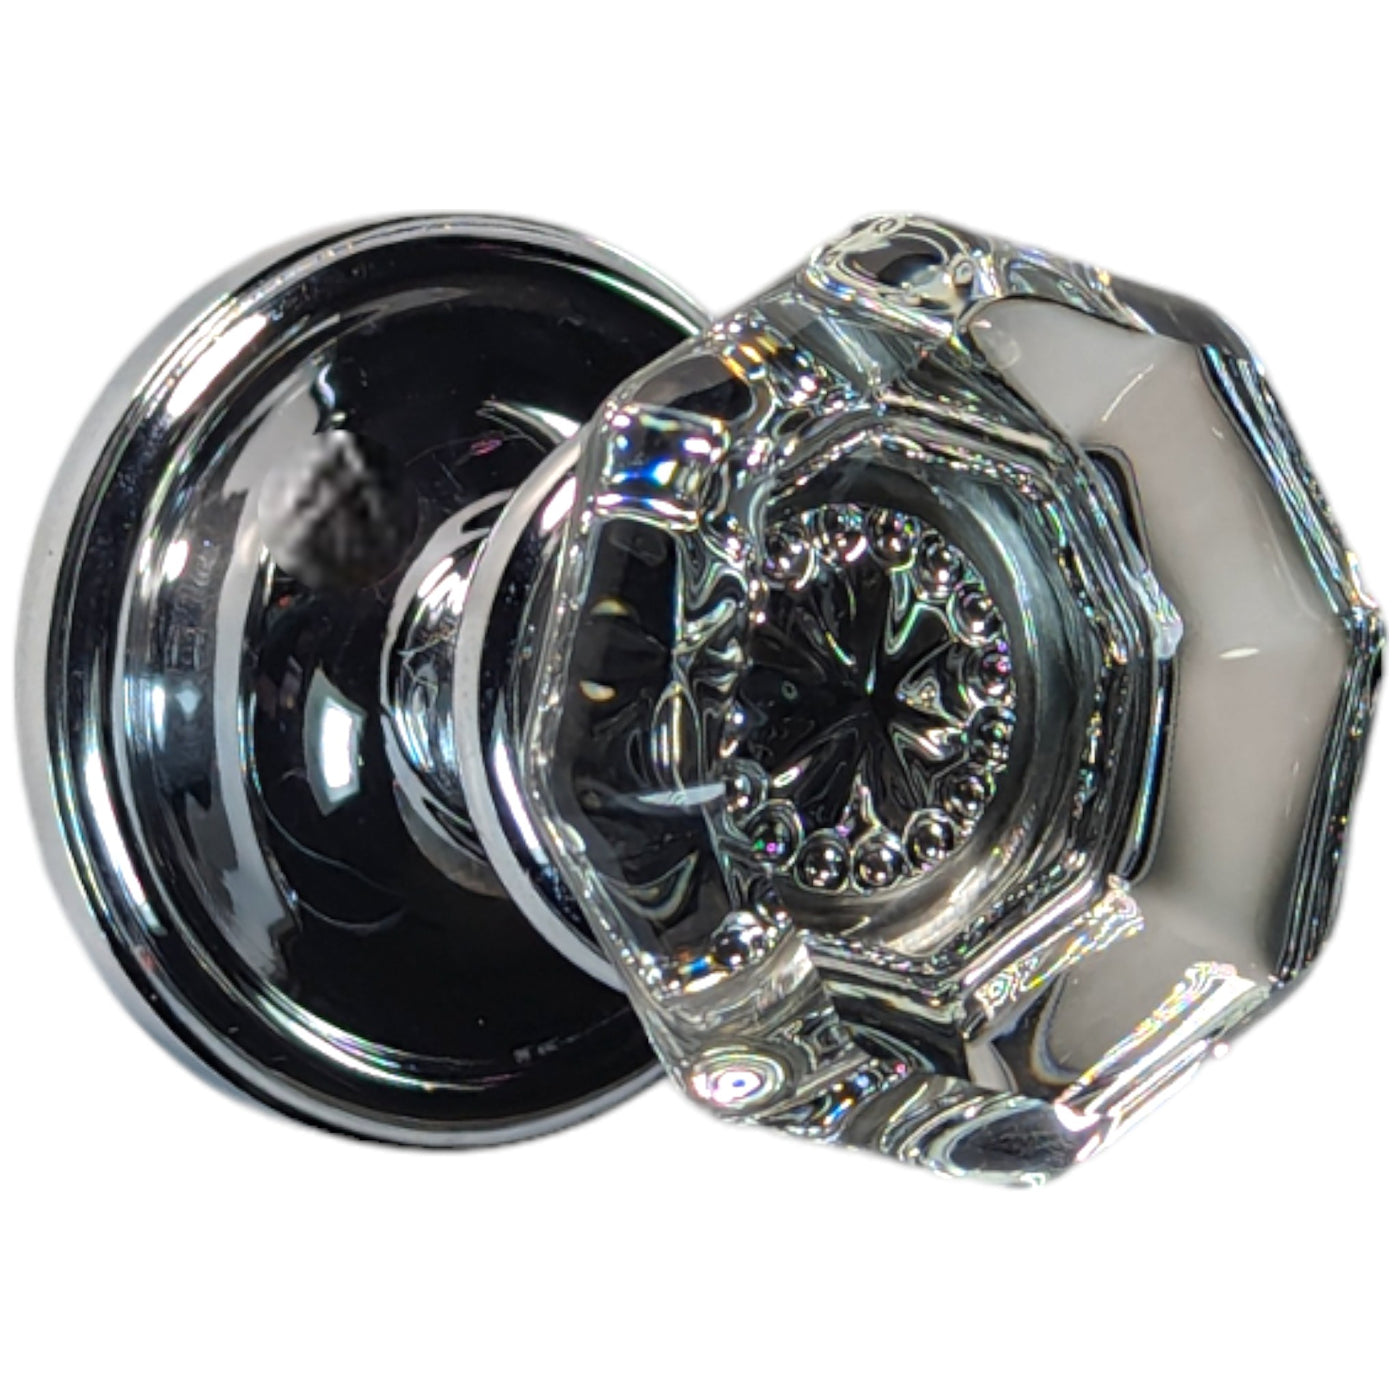 Traditional Rosette Door Set with Octagon Crystal Door Knobs (Several Finishes Available)